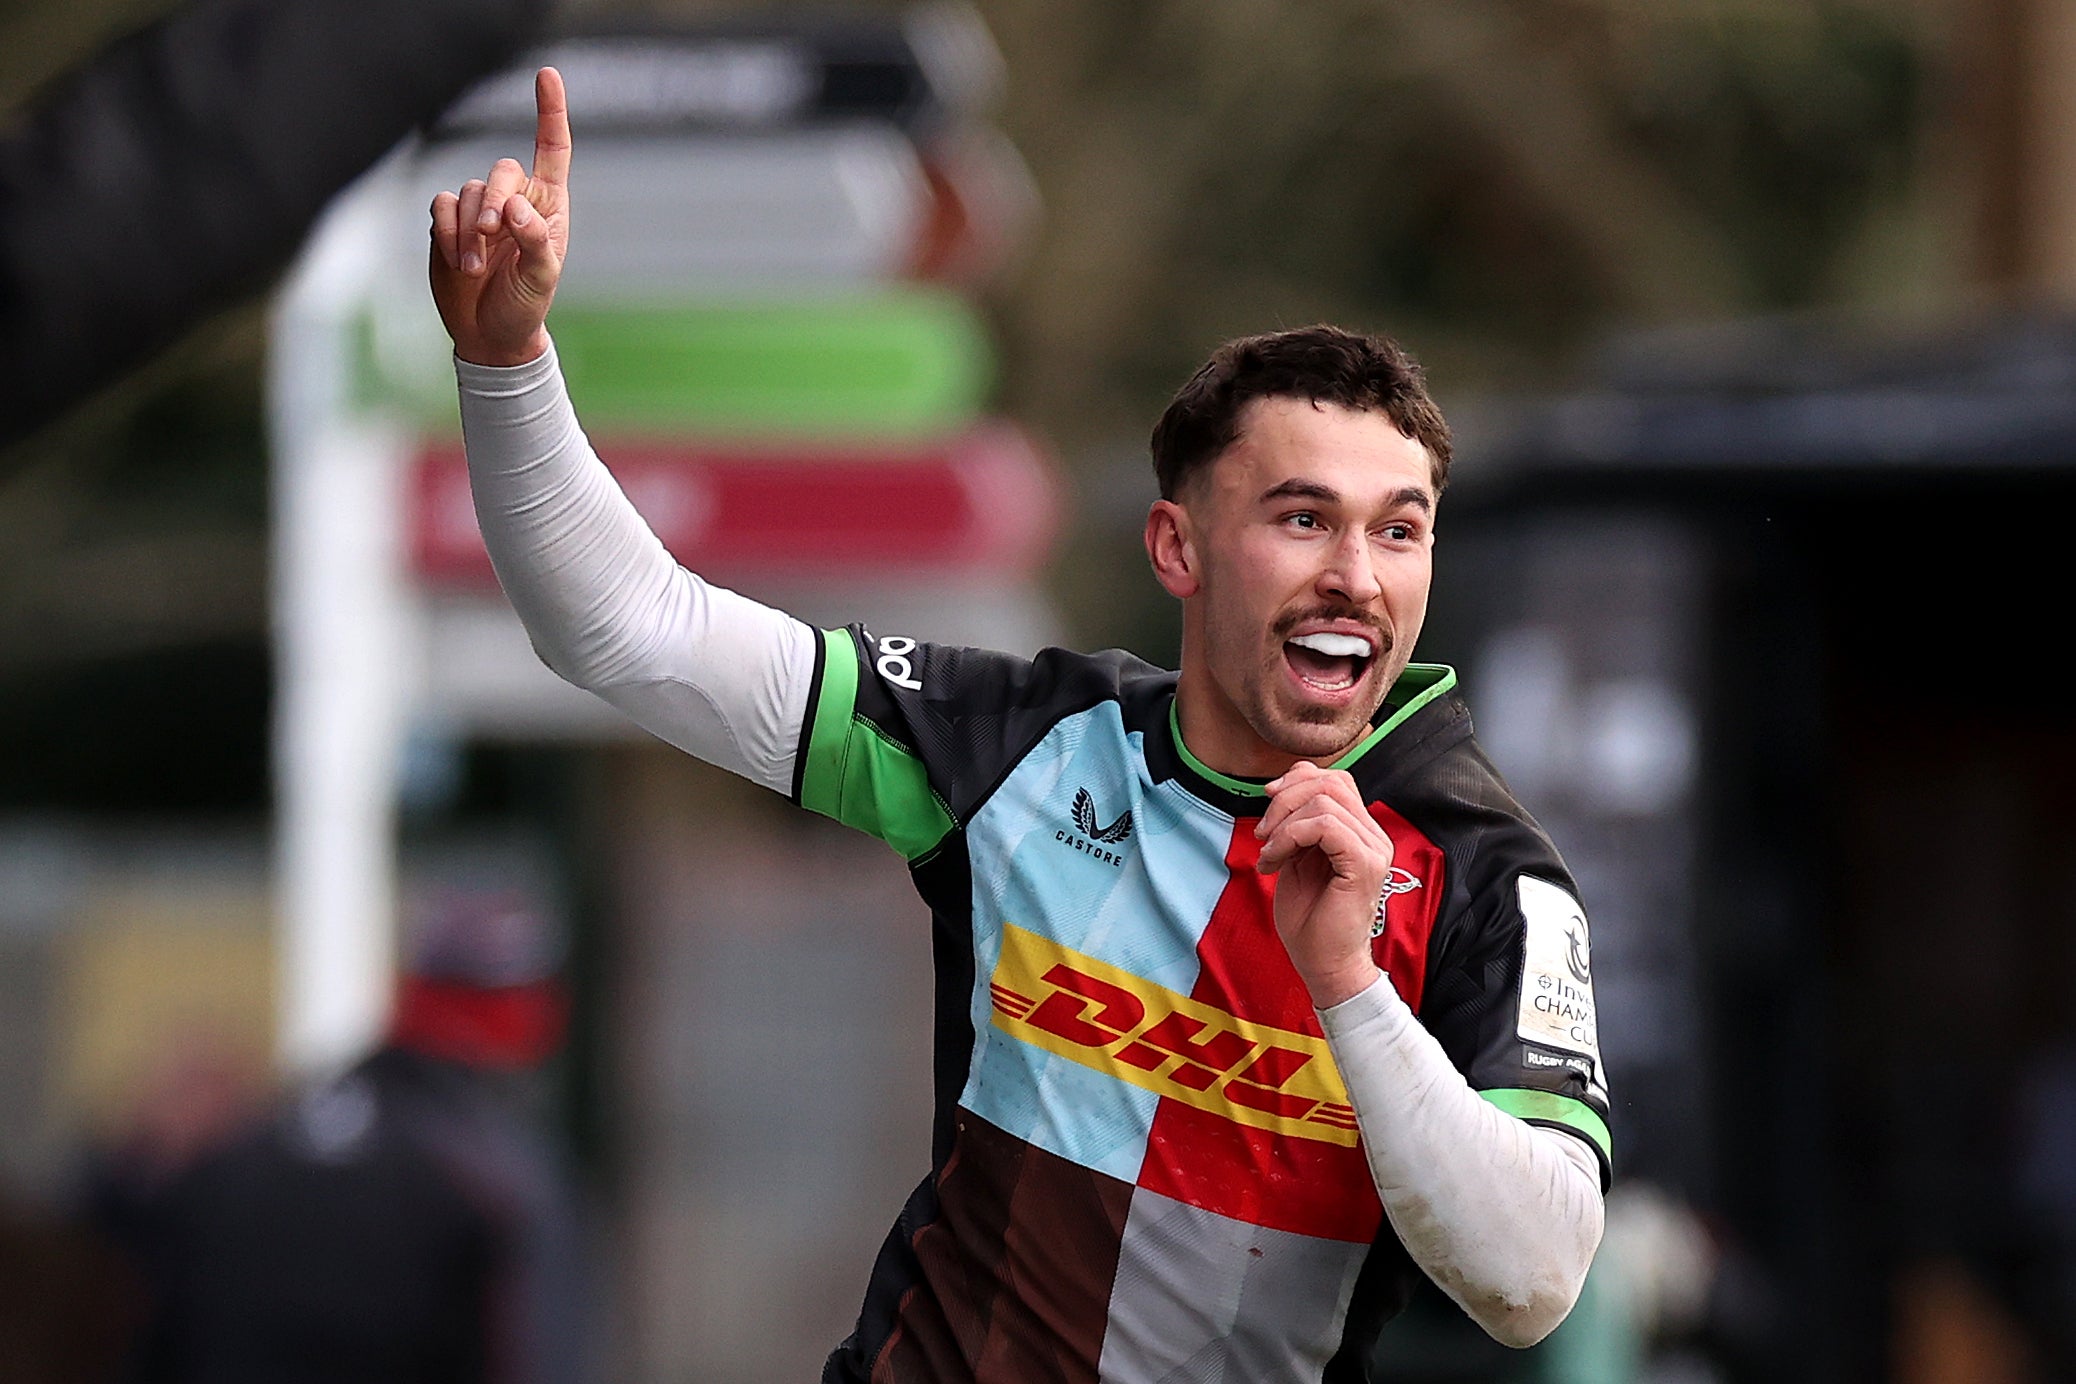 Harlequins stormed to a dominant victory in the Champions Cup